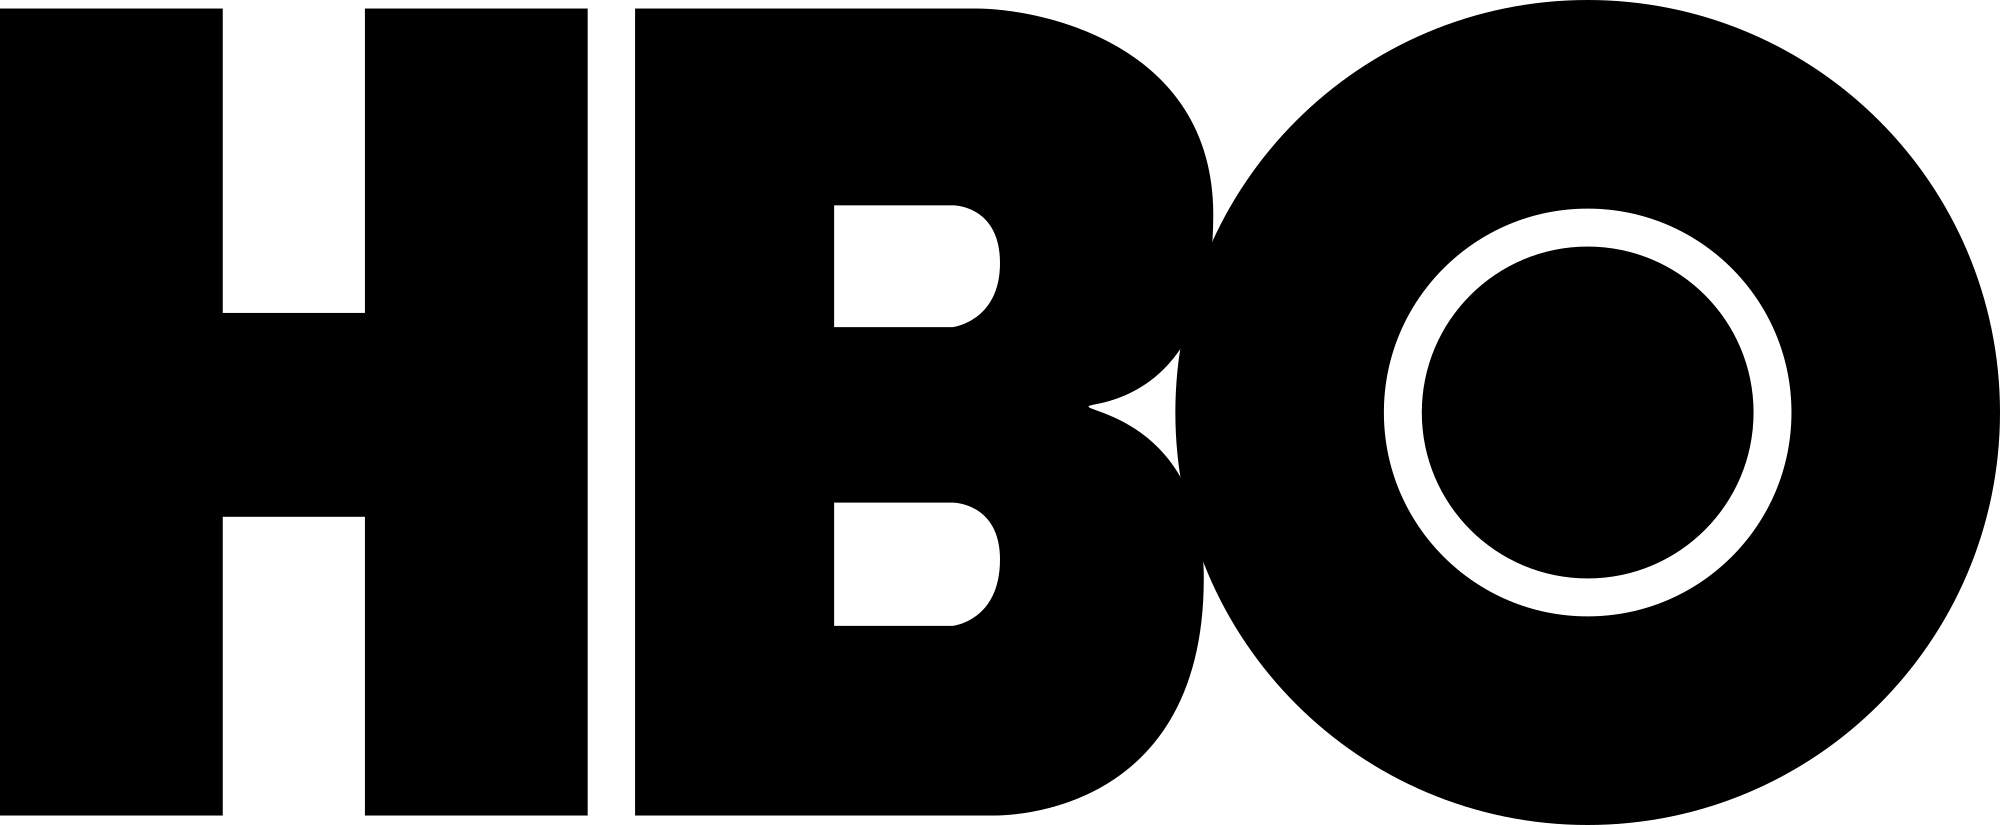 2000px-HBO_logo.png